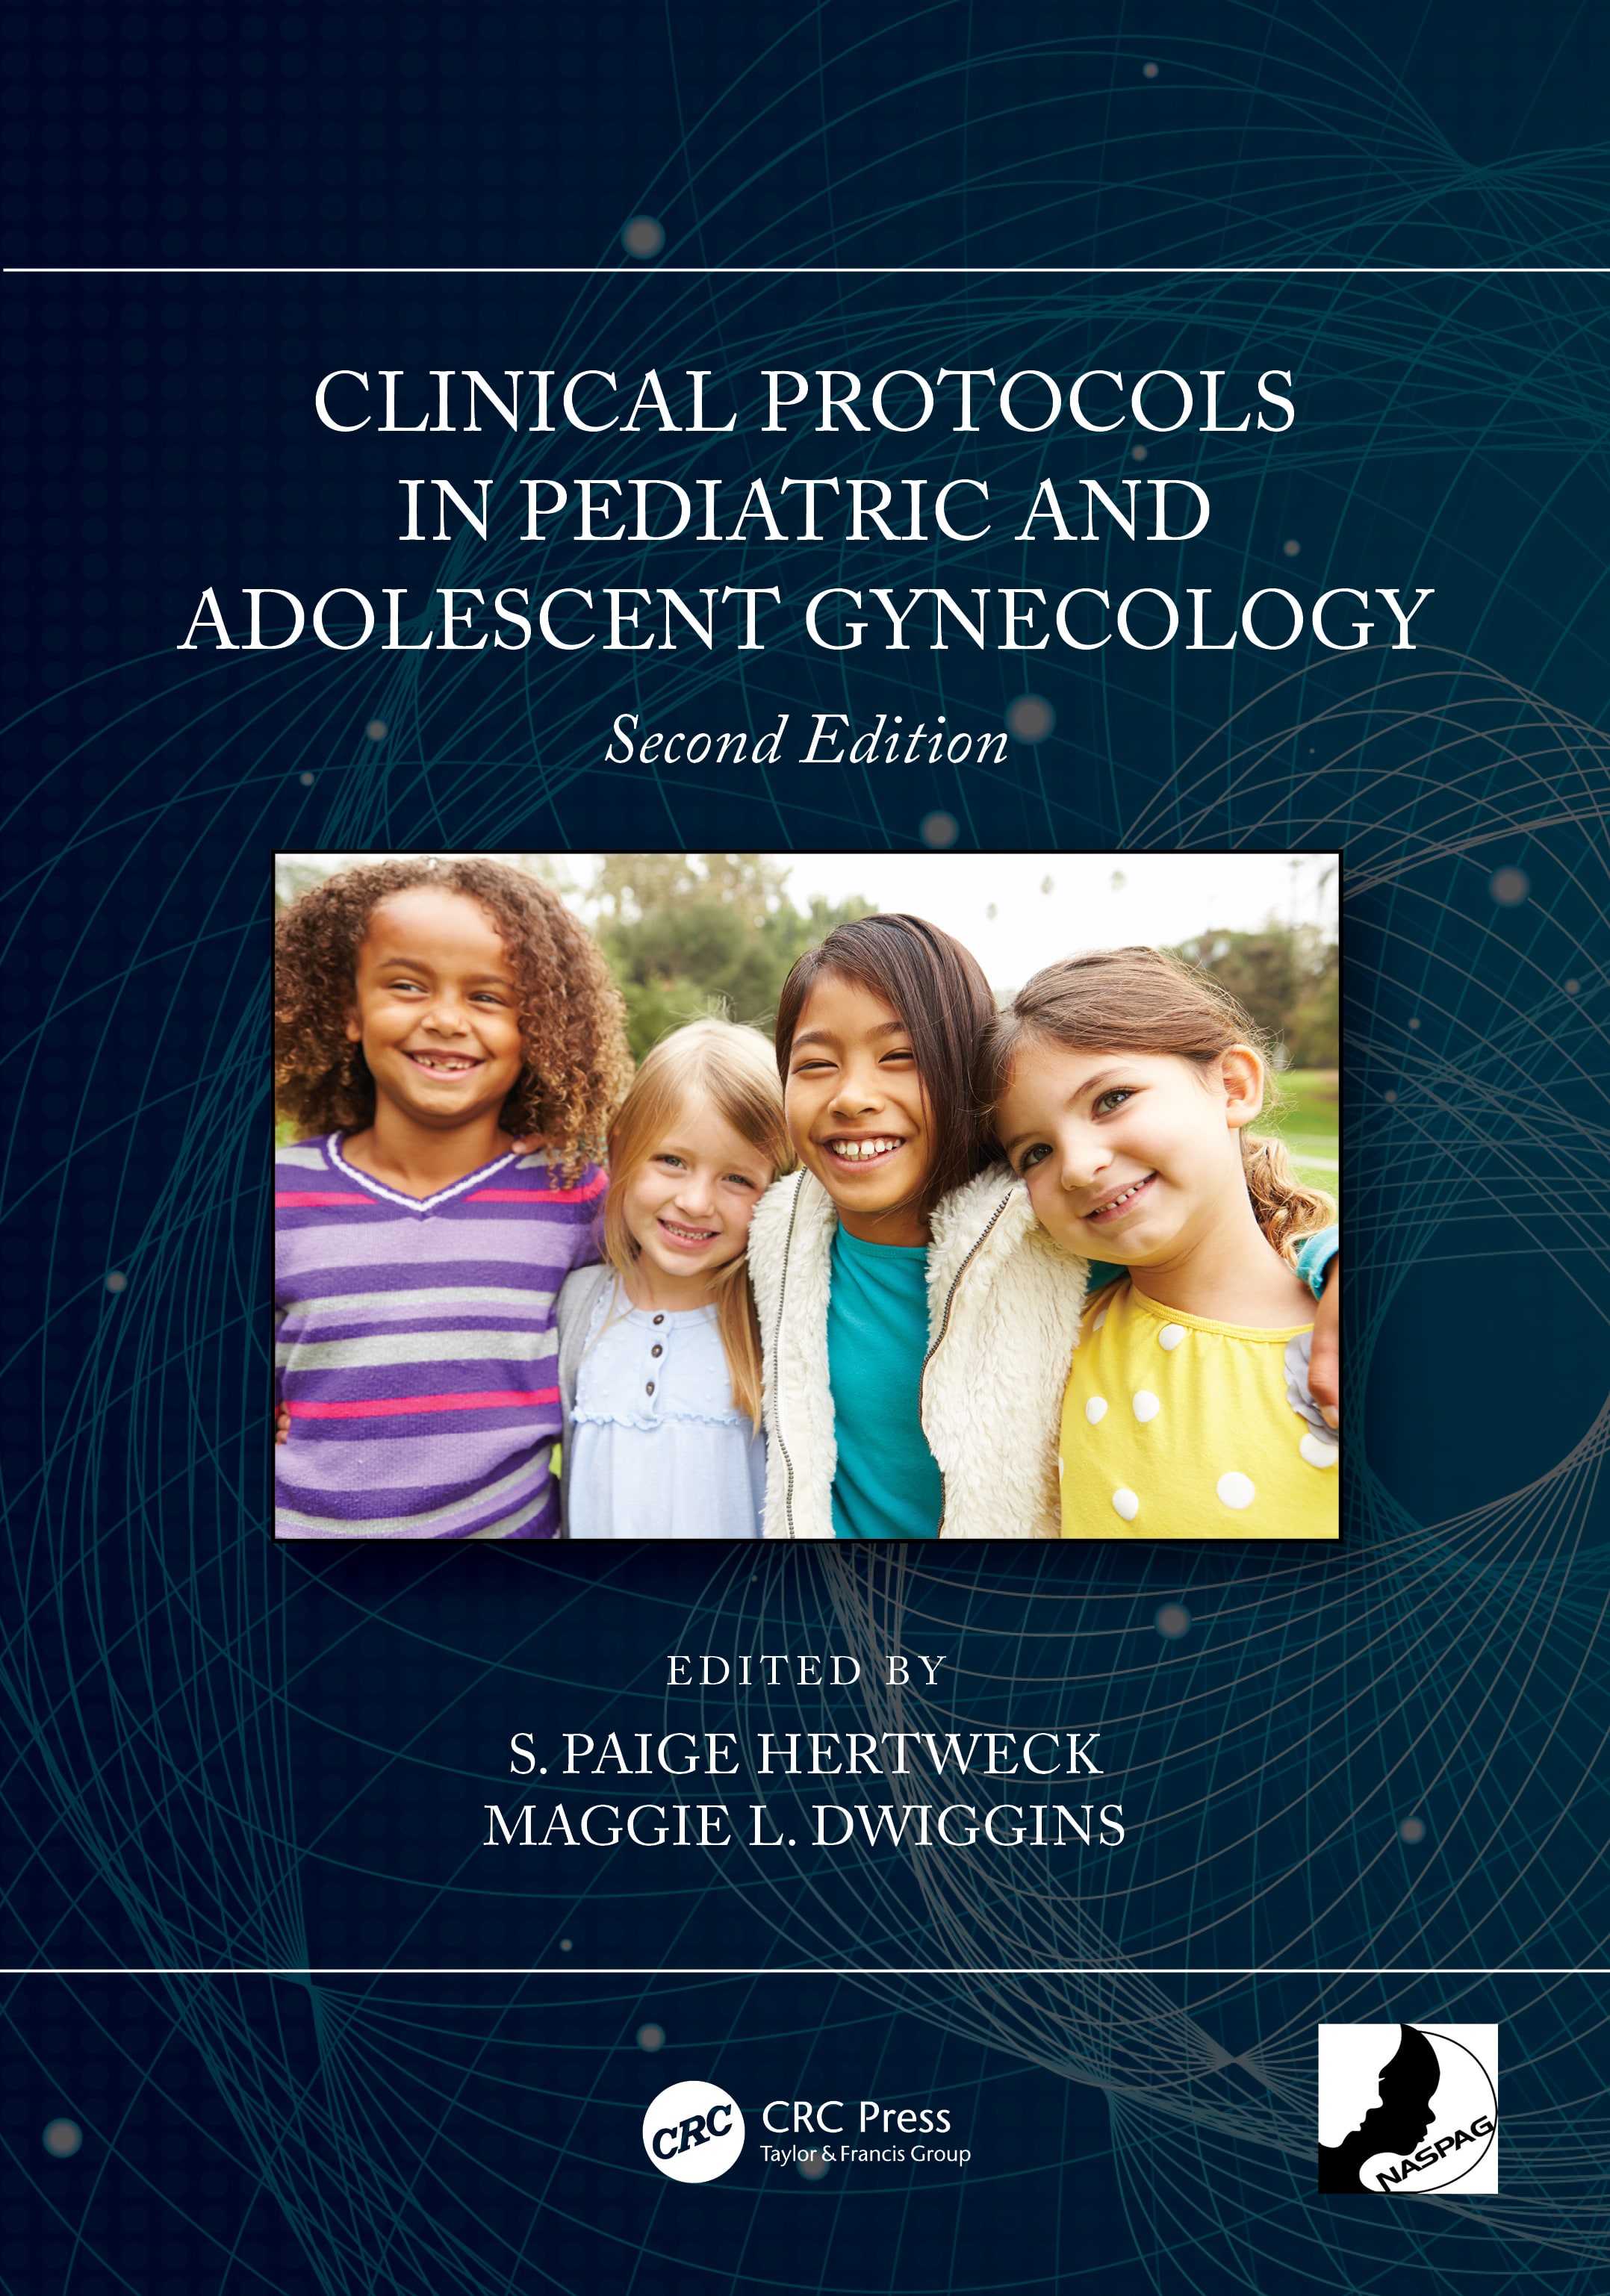 clinical protocols in pediatric and adolescent gynecology 2nd edition s paige hertweck, maggie dwiggins